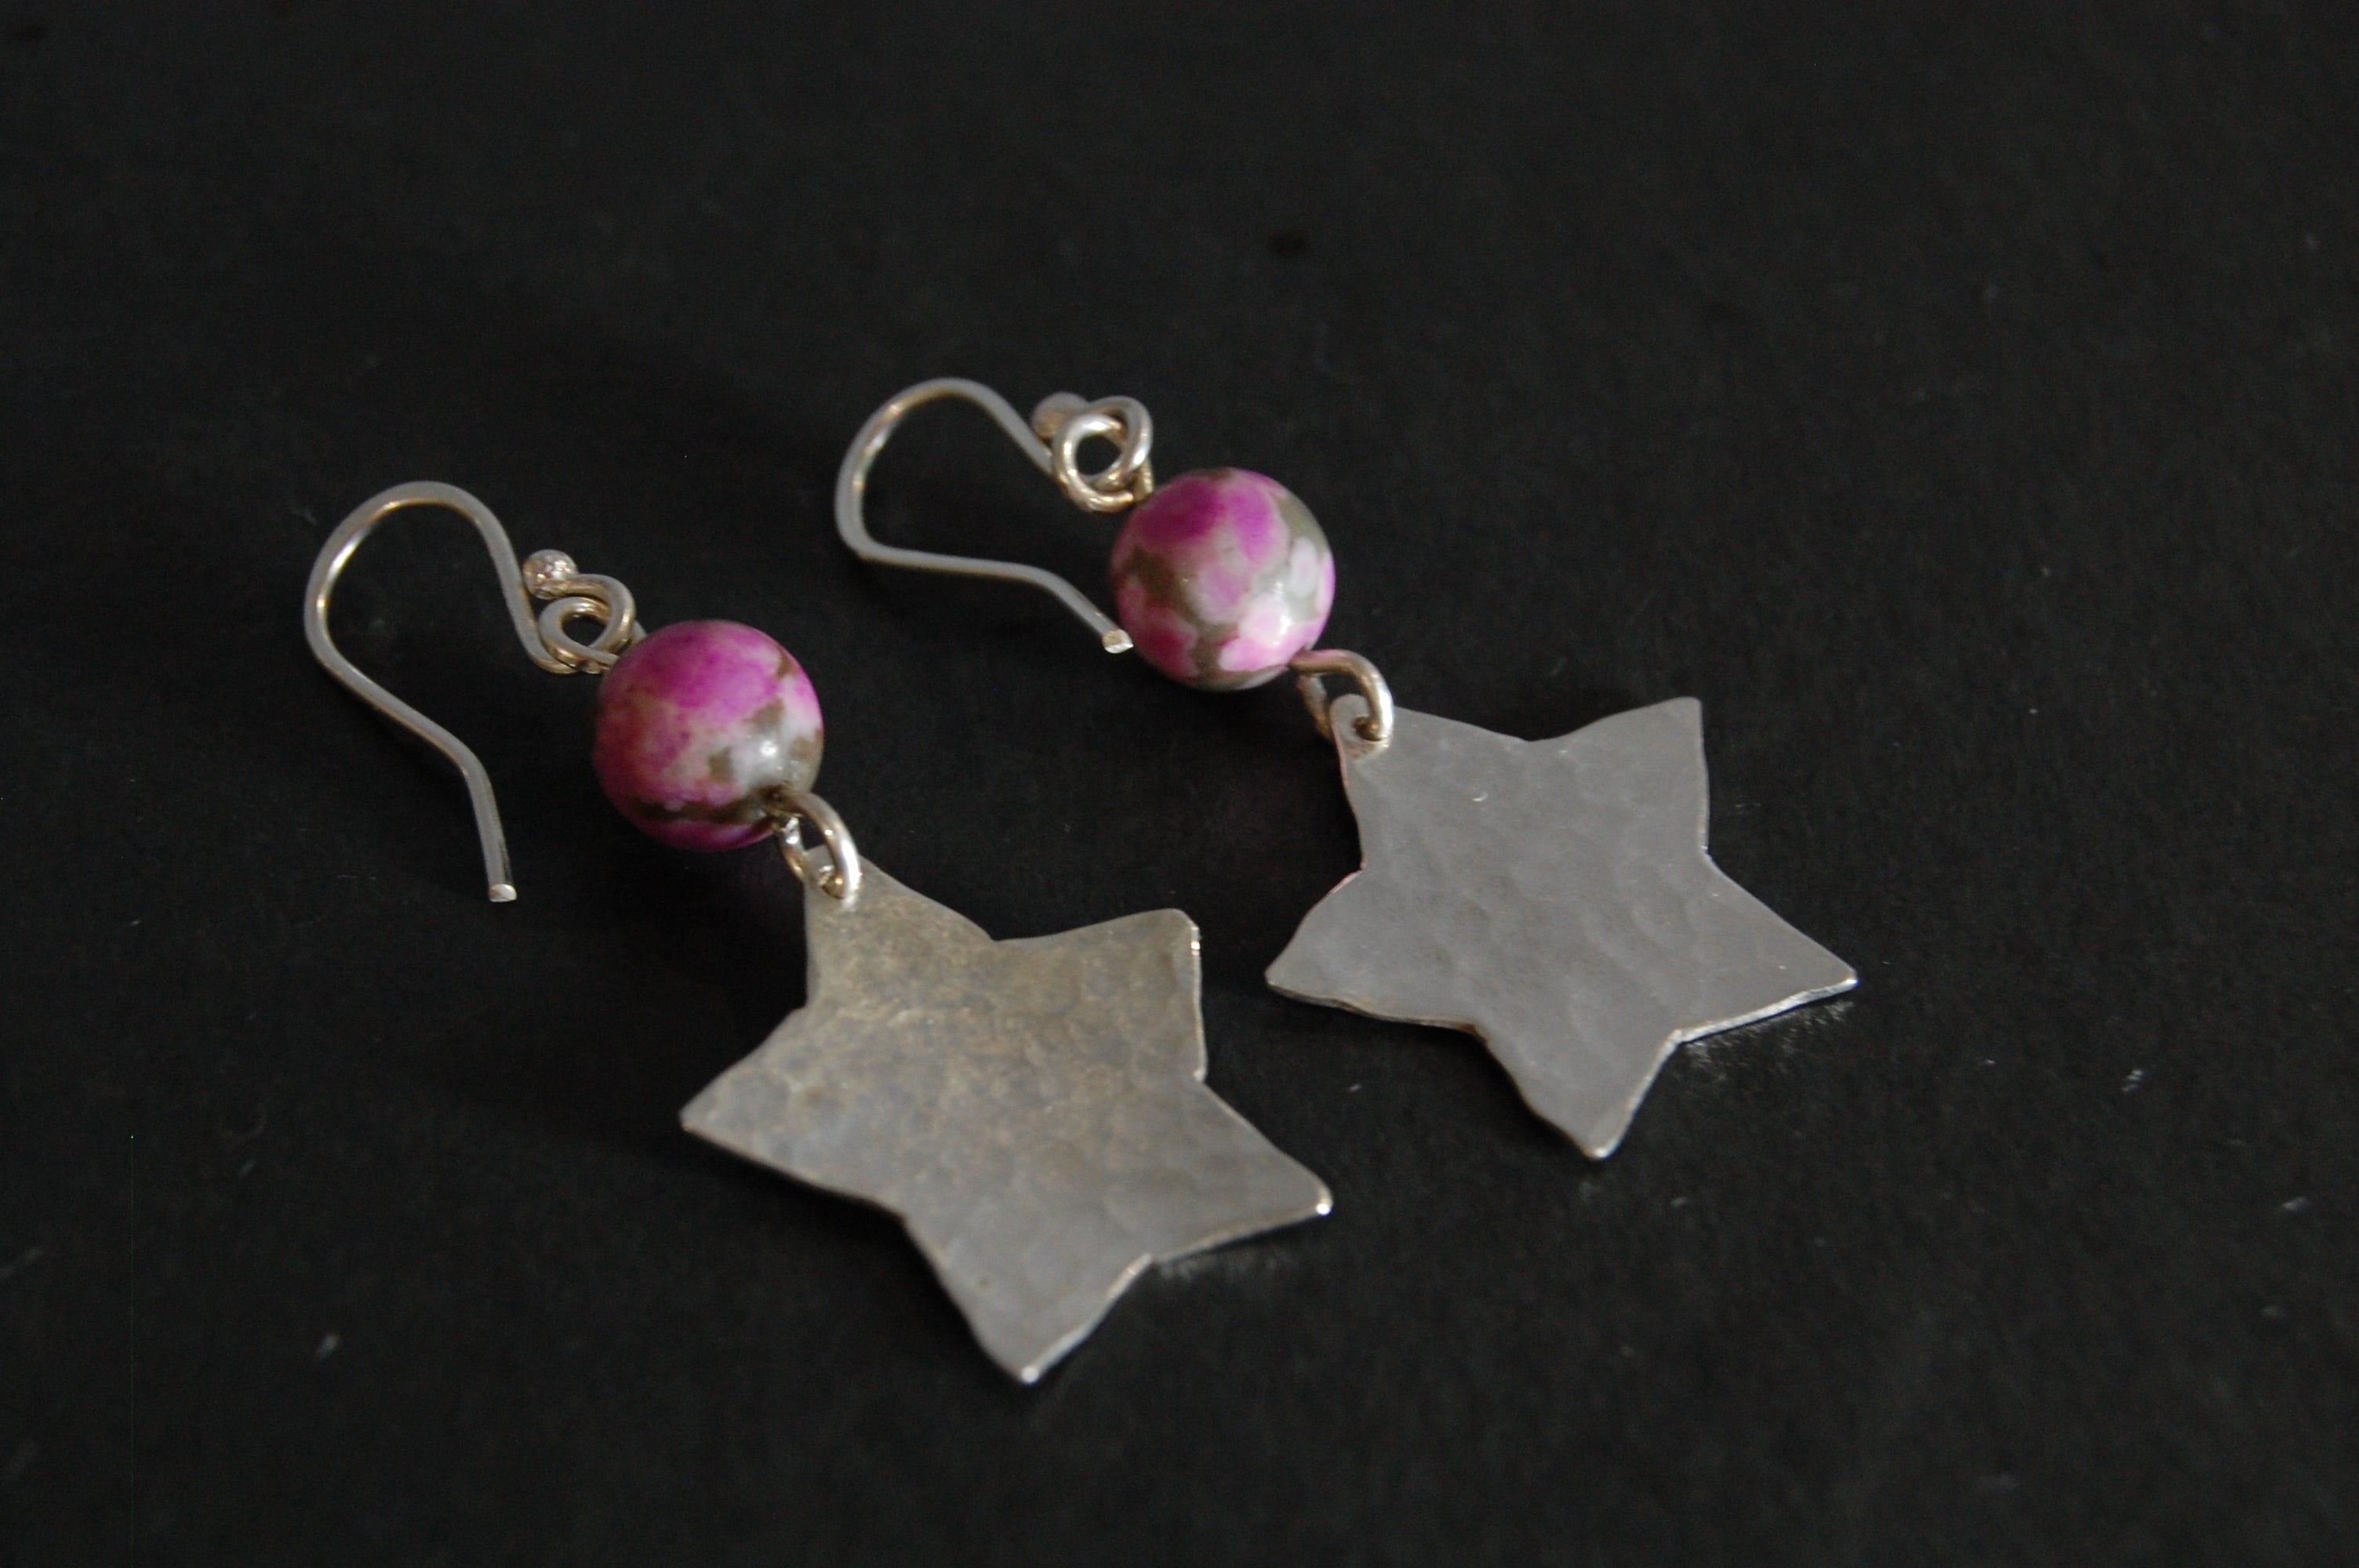 Small Round-Hammered Silver Star Earrings - Drop with Bead